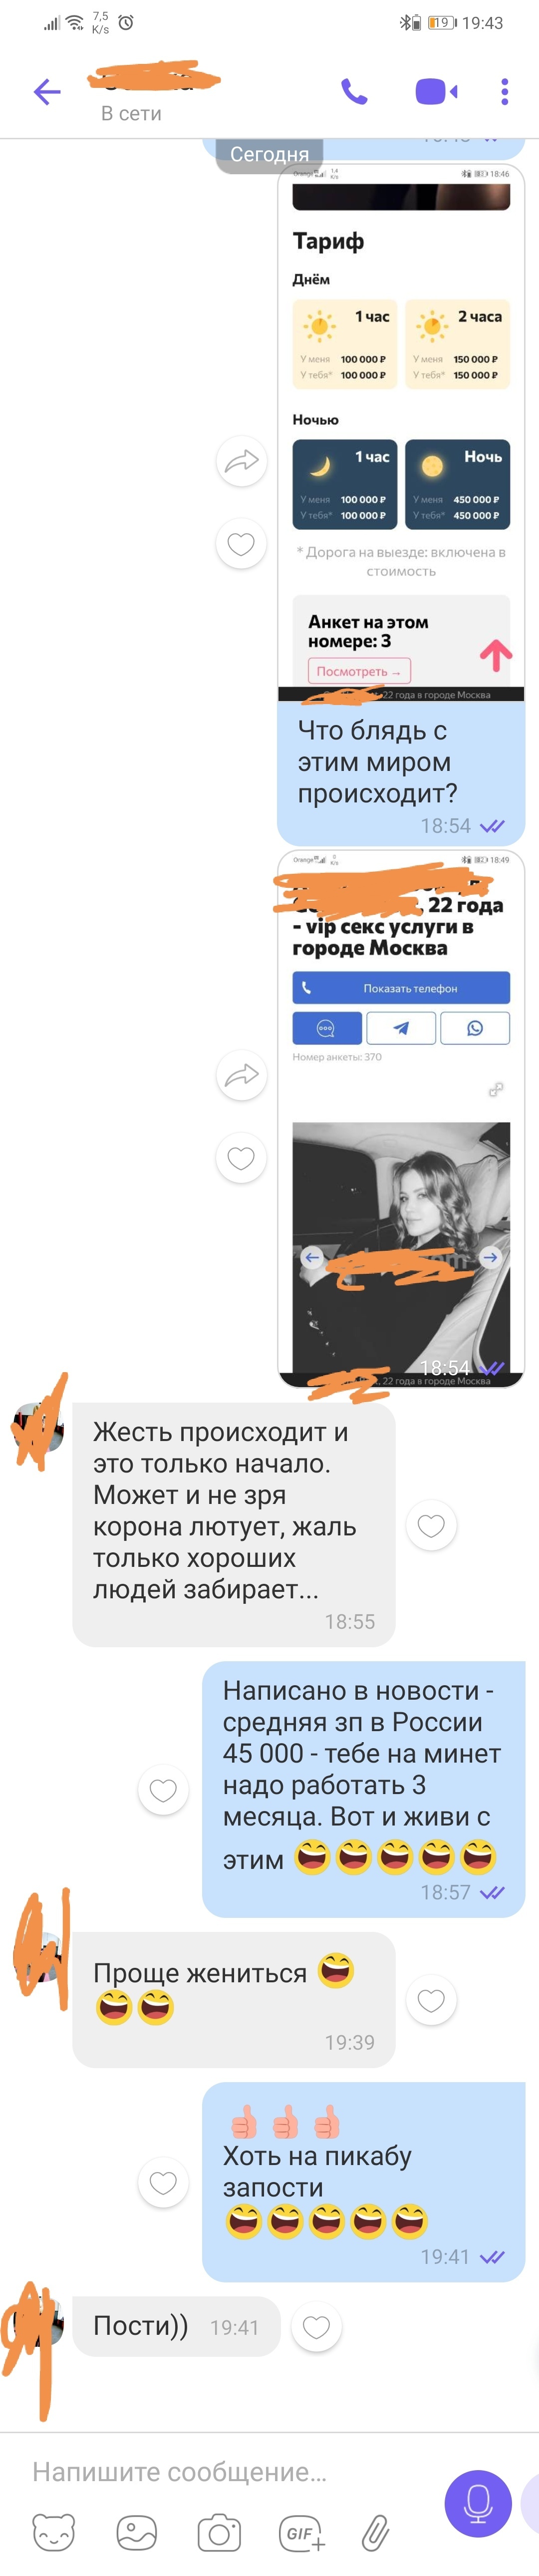 Not a special post for Peekaboo, or what's wrong with this world? - Longpost, Russia, Low salary, Salary, Wife, Peekaboo, Prostitution, Screenshot, My